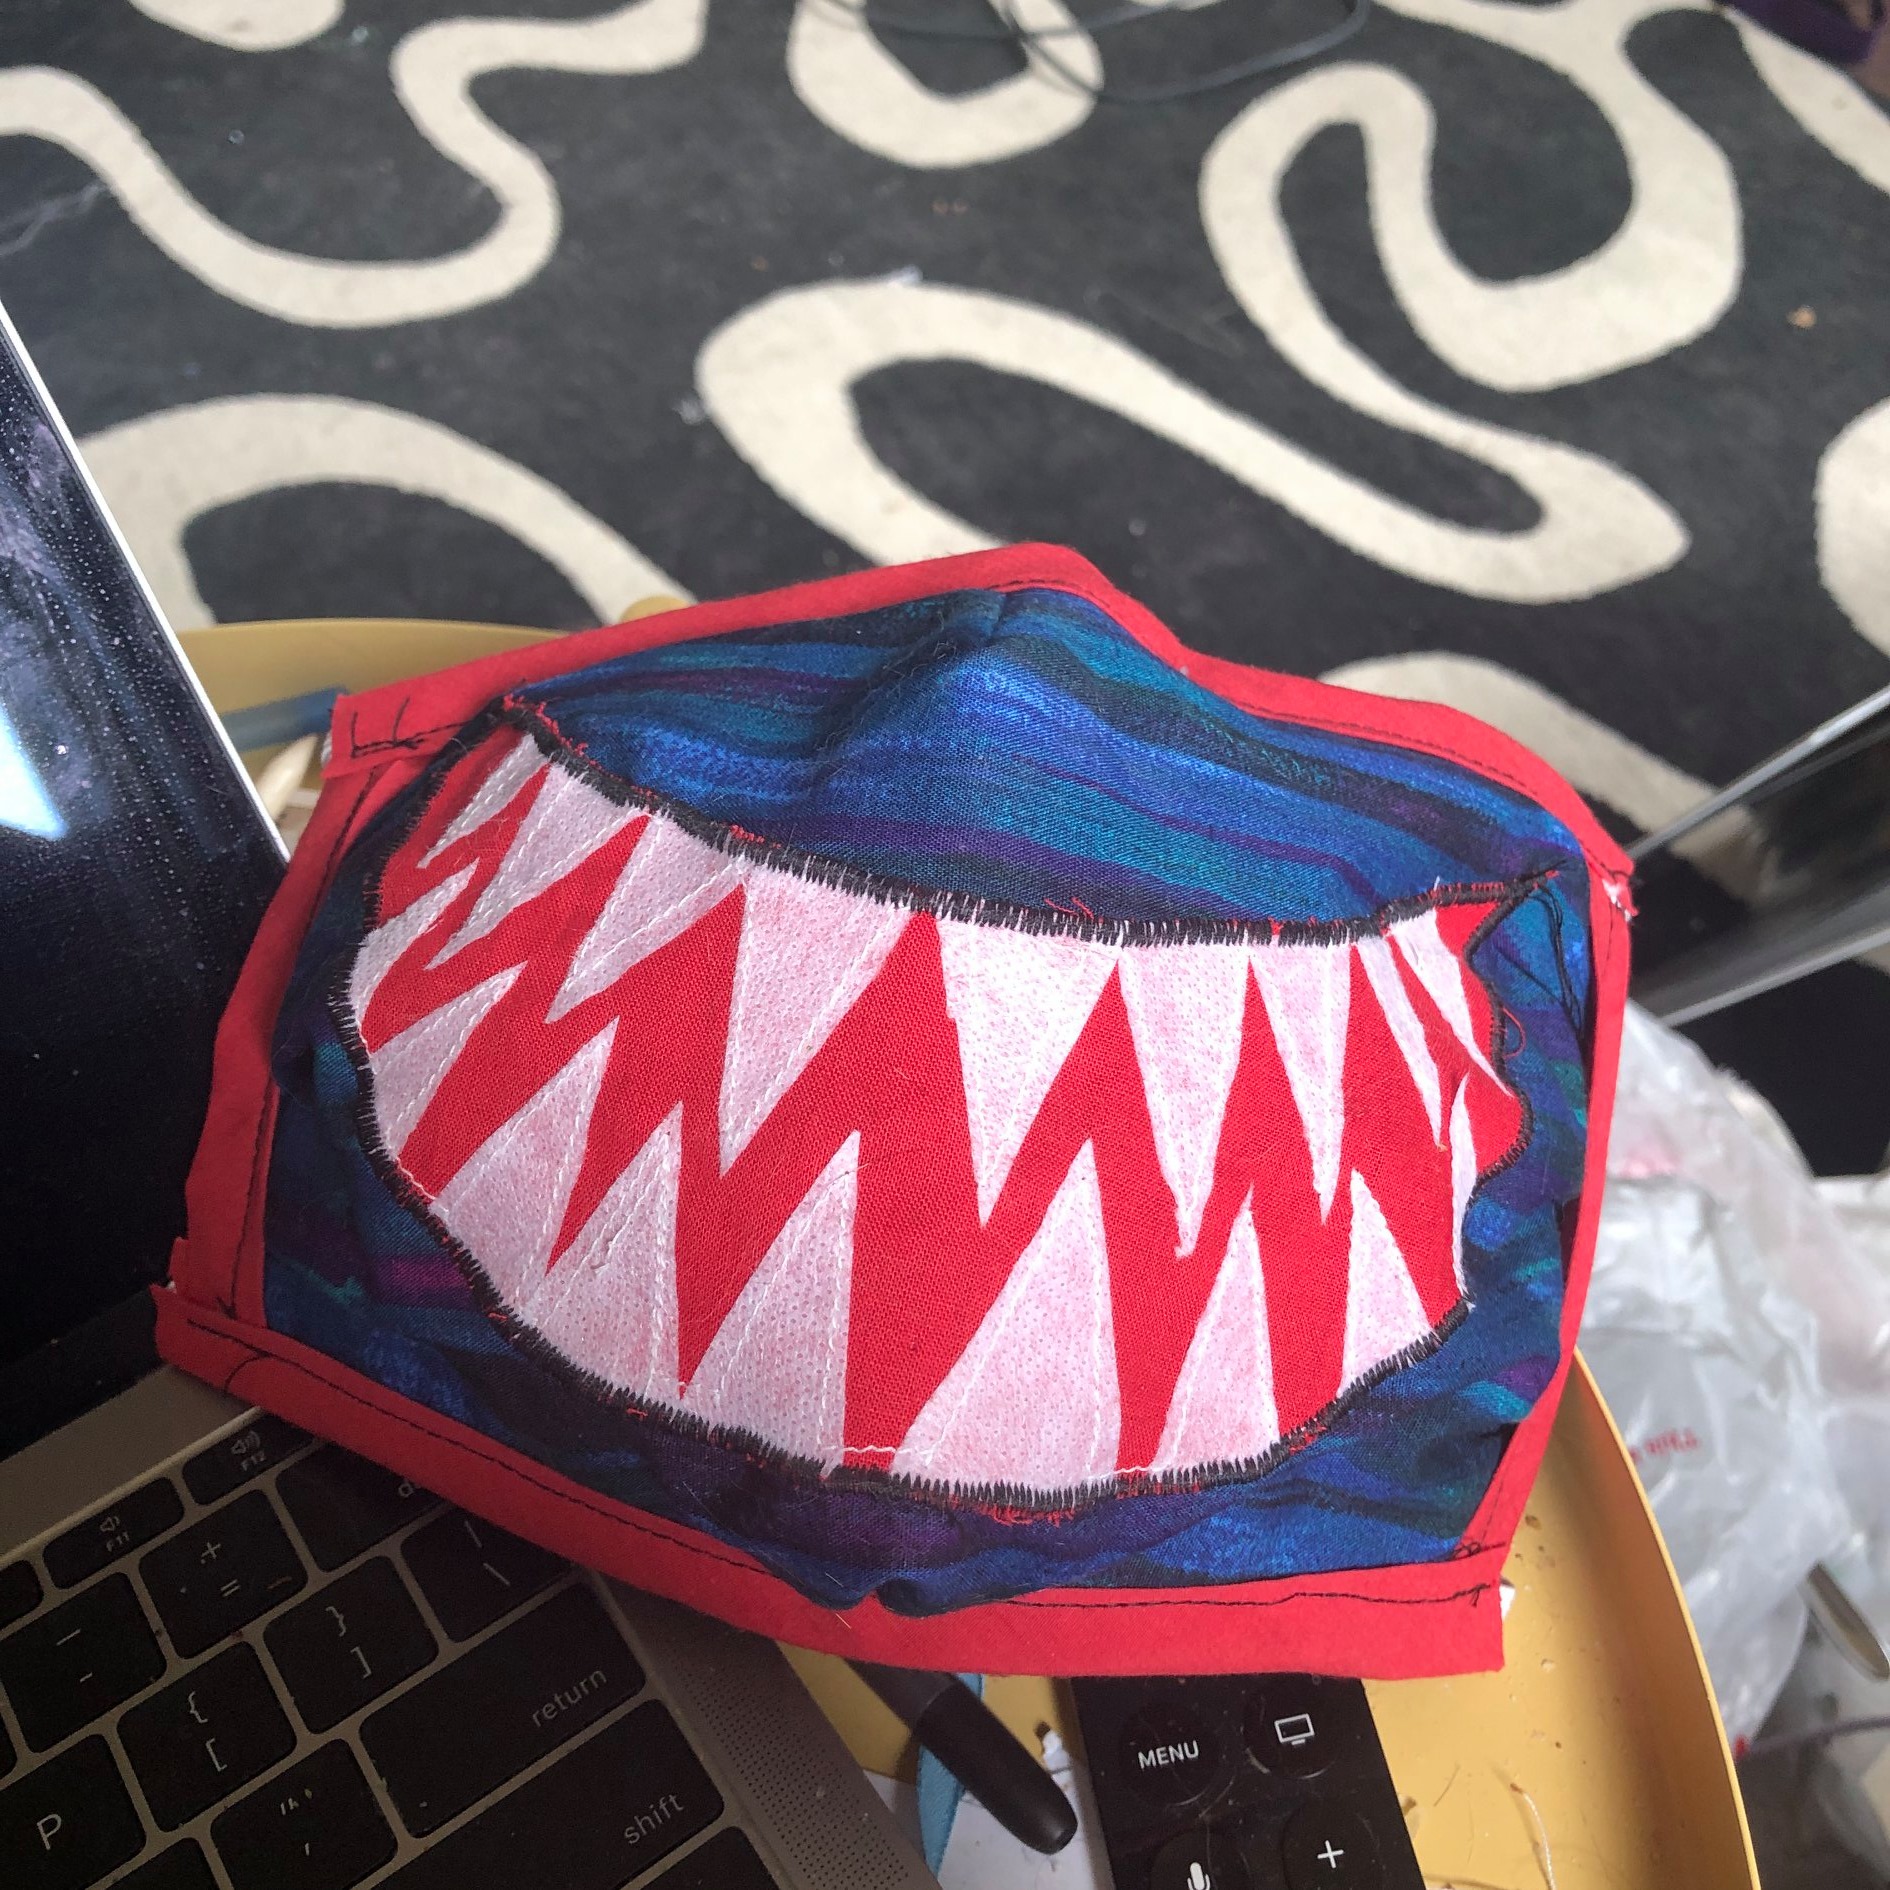 Mask of the Day: Shark mouth